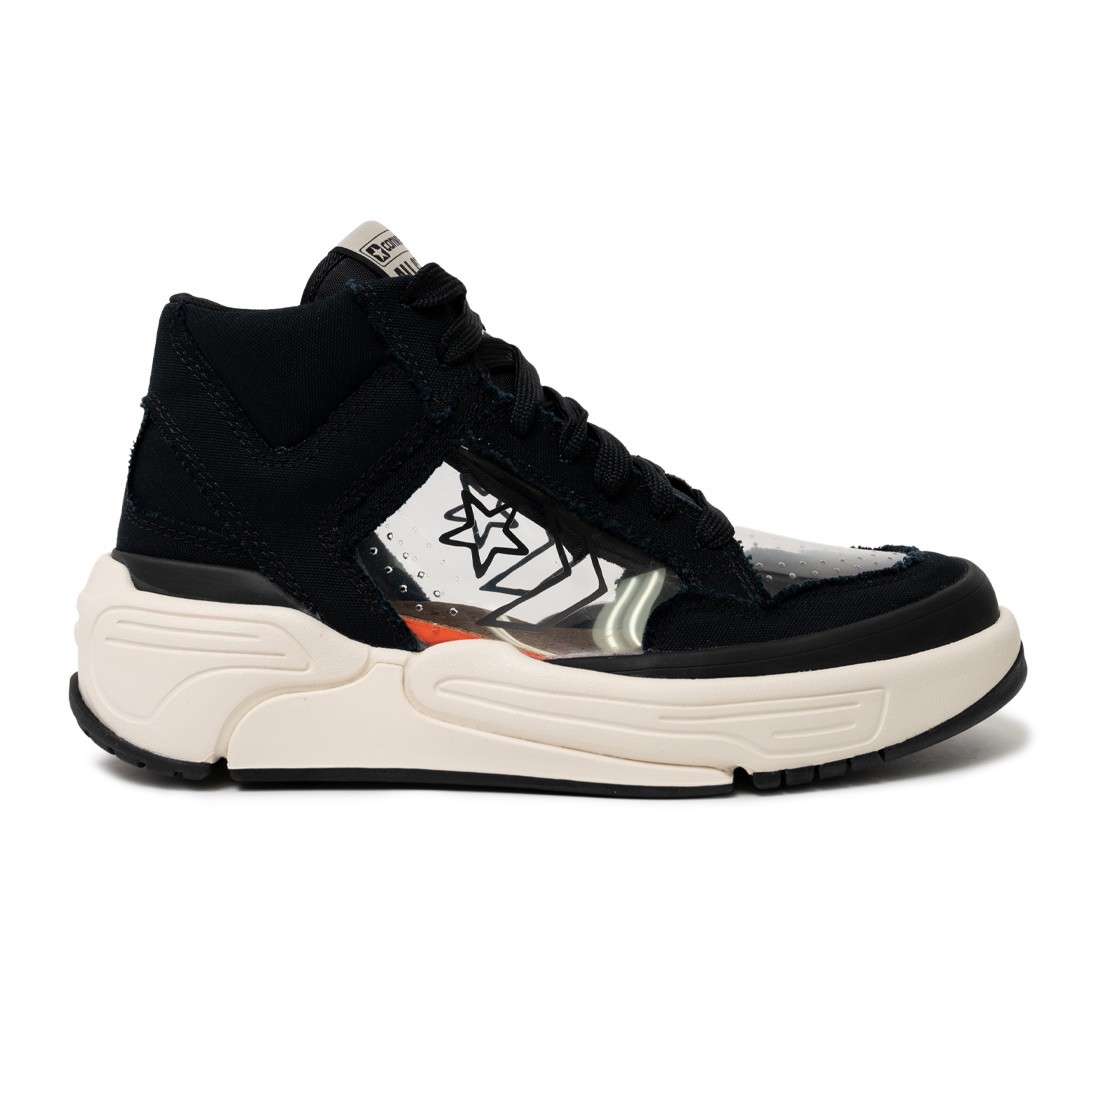 converse ct all star crater knit blk